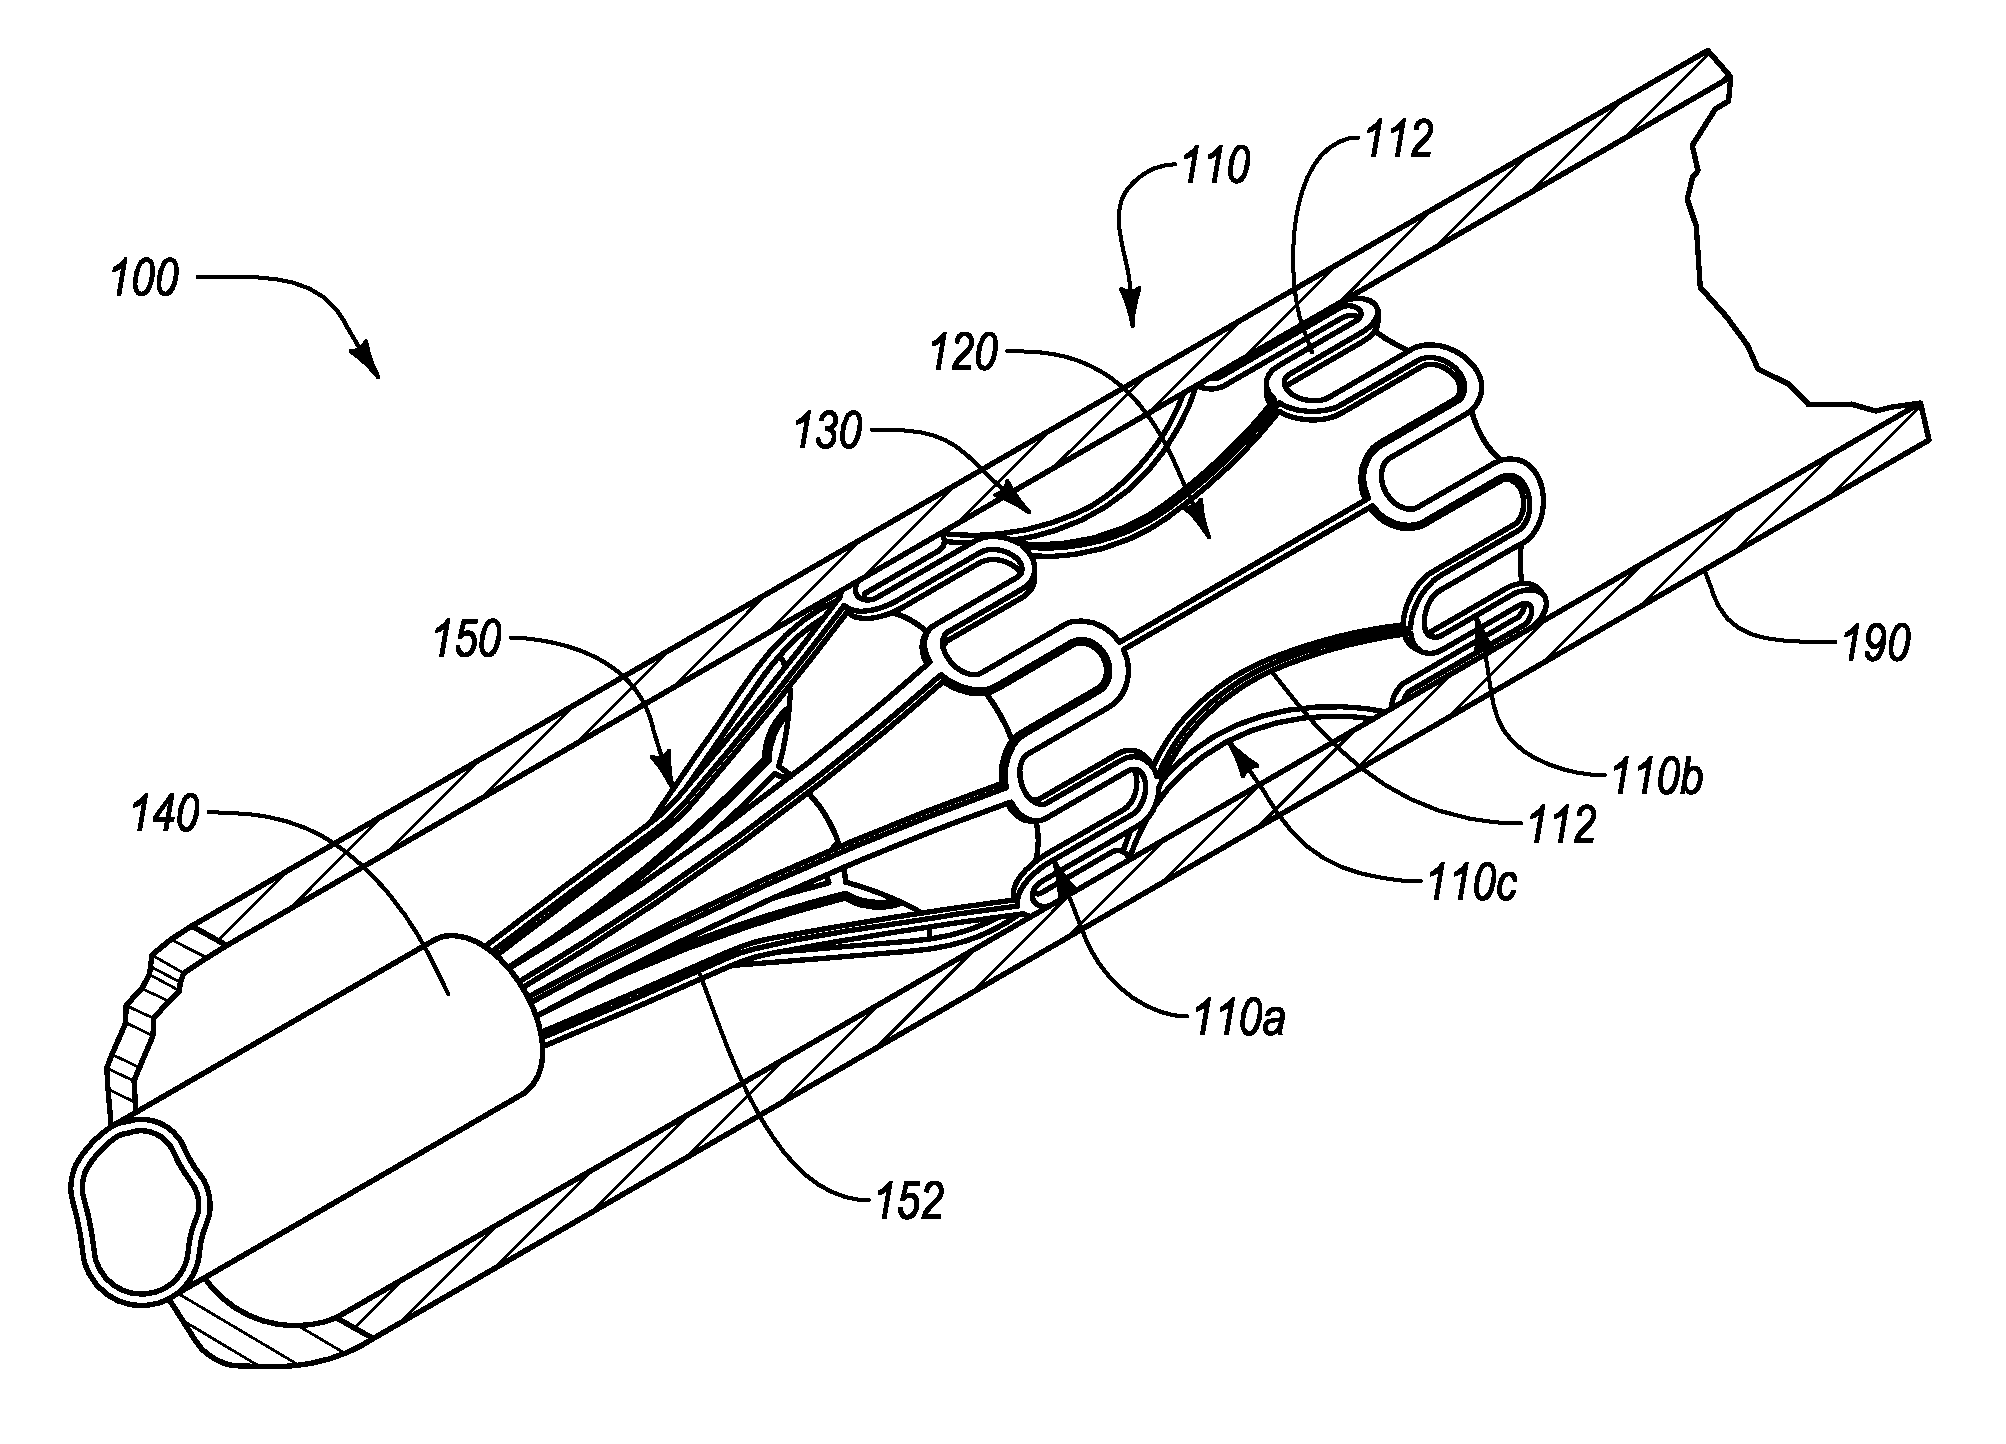 Interluminal medical treatment devices and methods